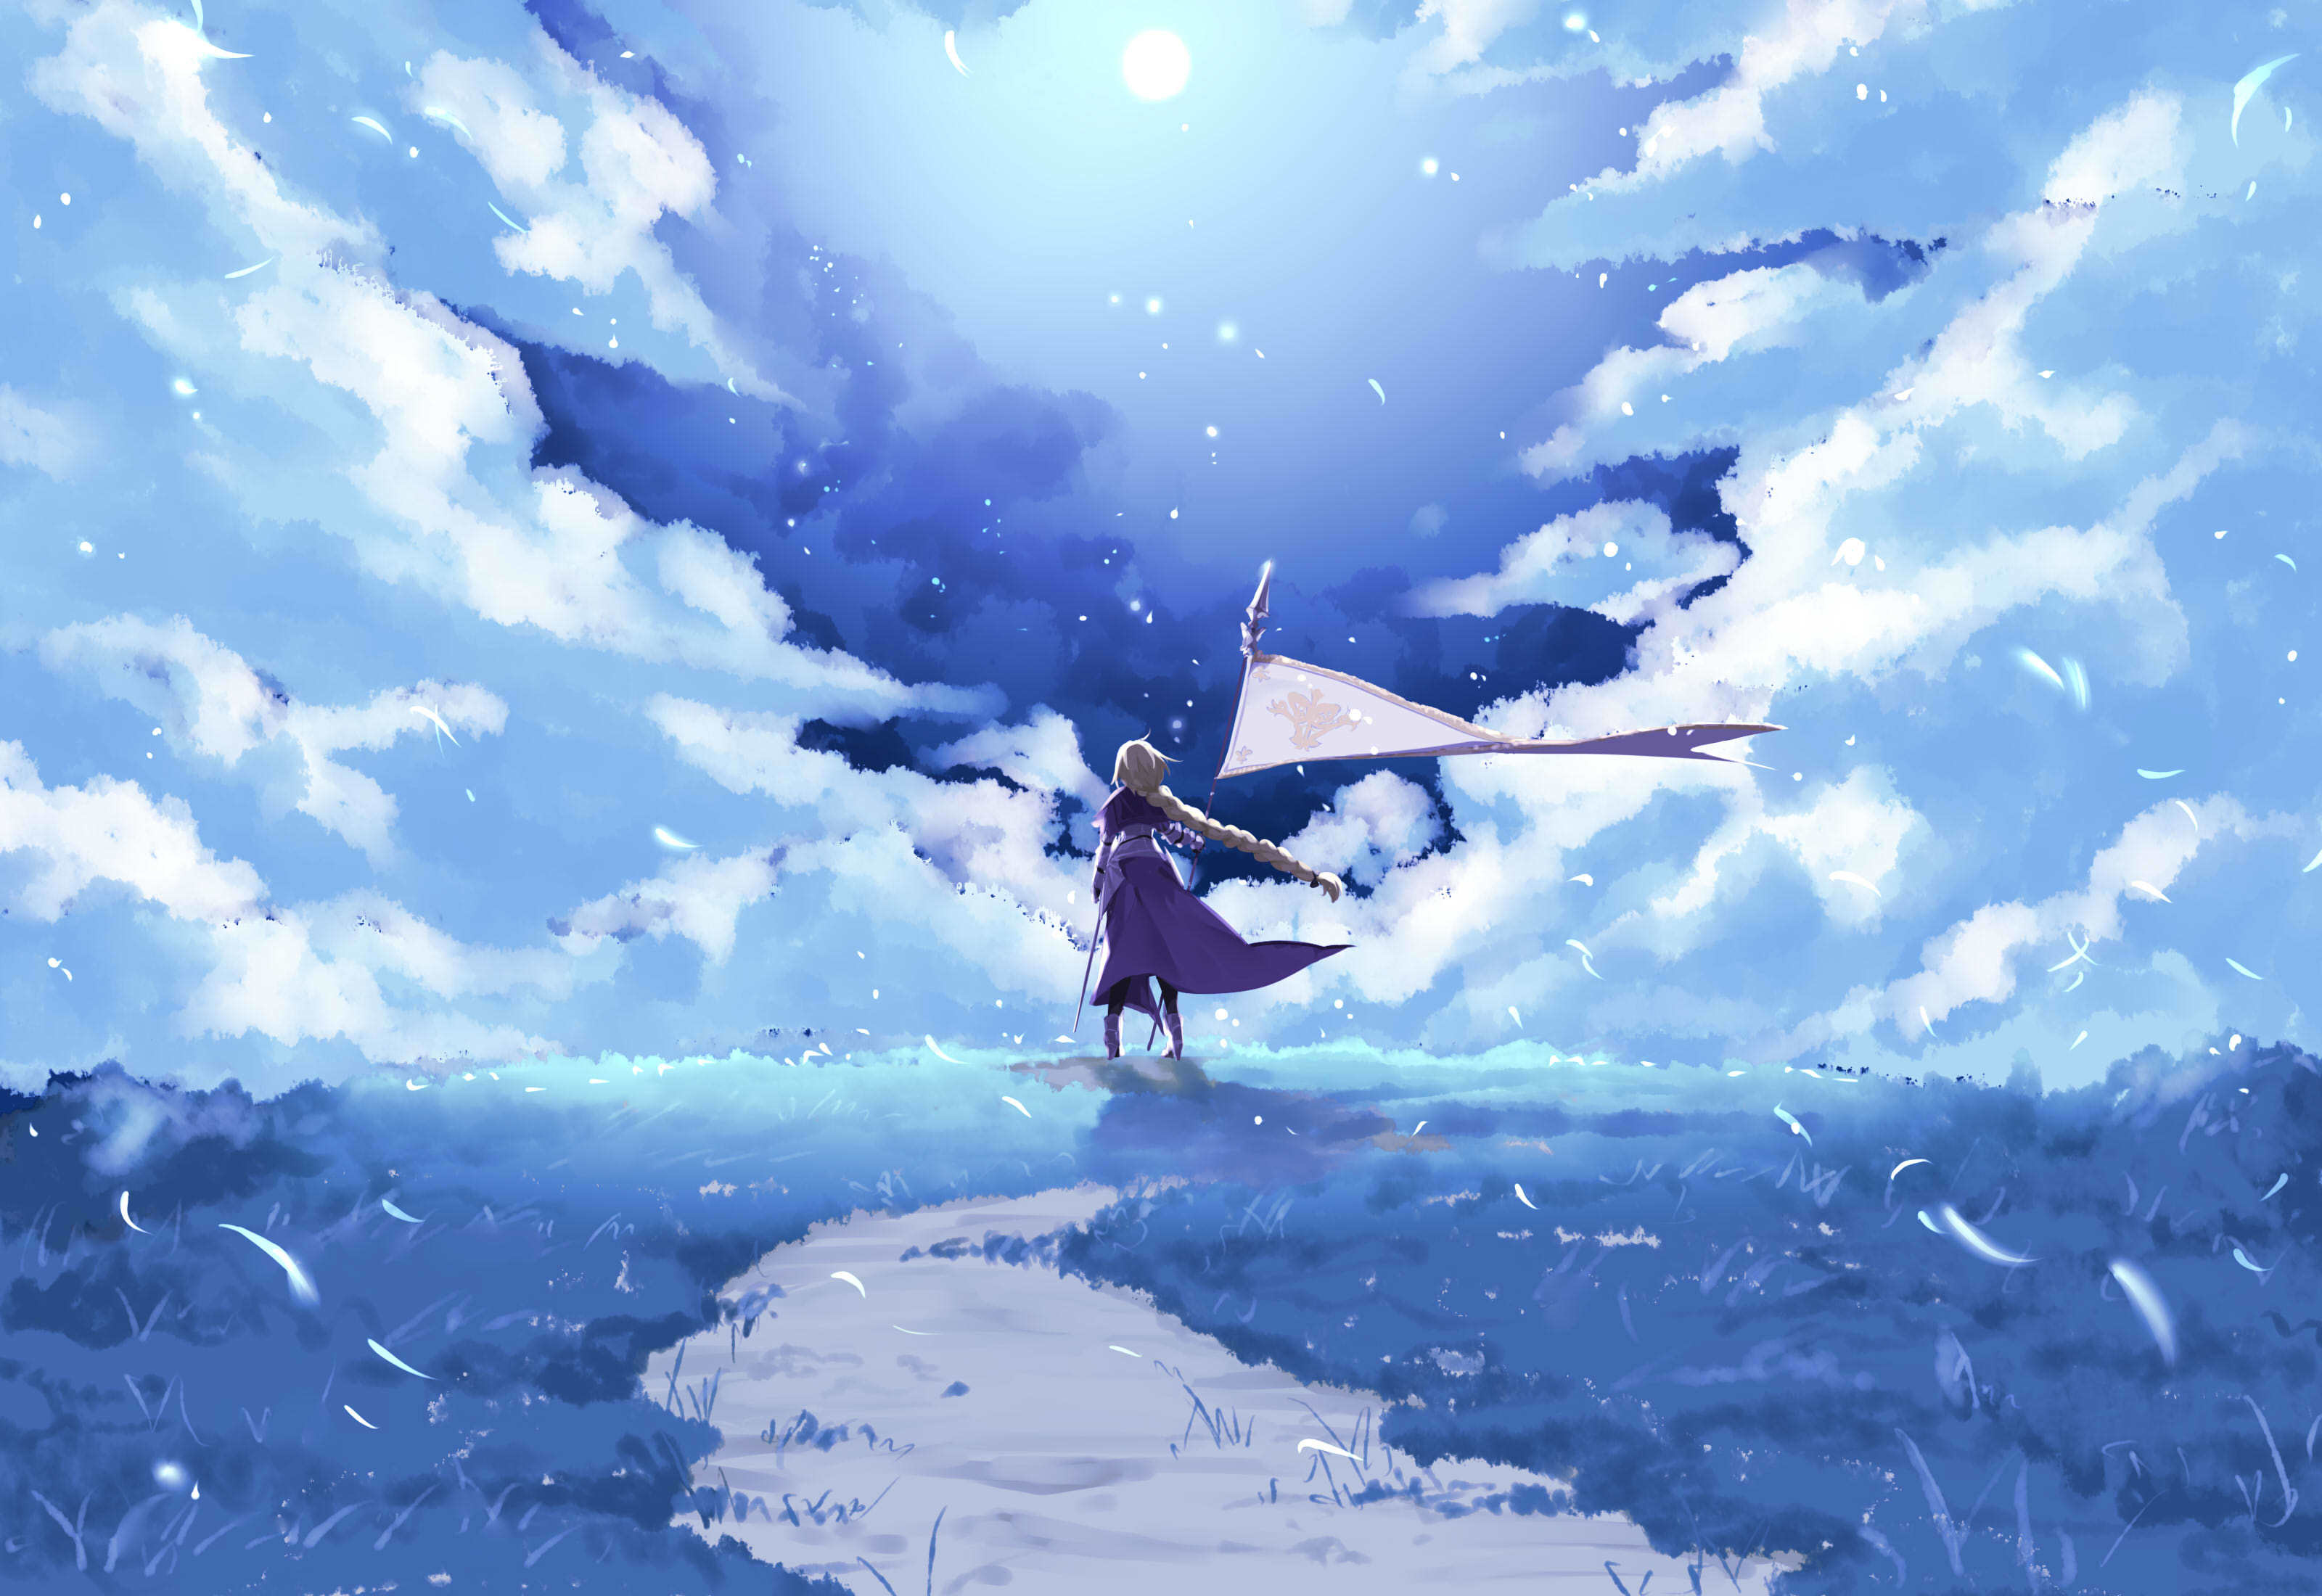 Anime 3200x2200 anime manga Fate/Grand Order Fate series anime girls fantasy art painting drawing Ruler (Fate/Grand Order) sky landscape clouds artwork